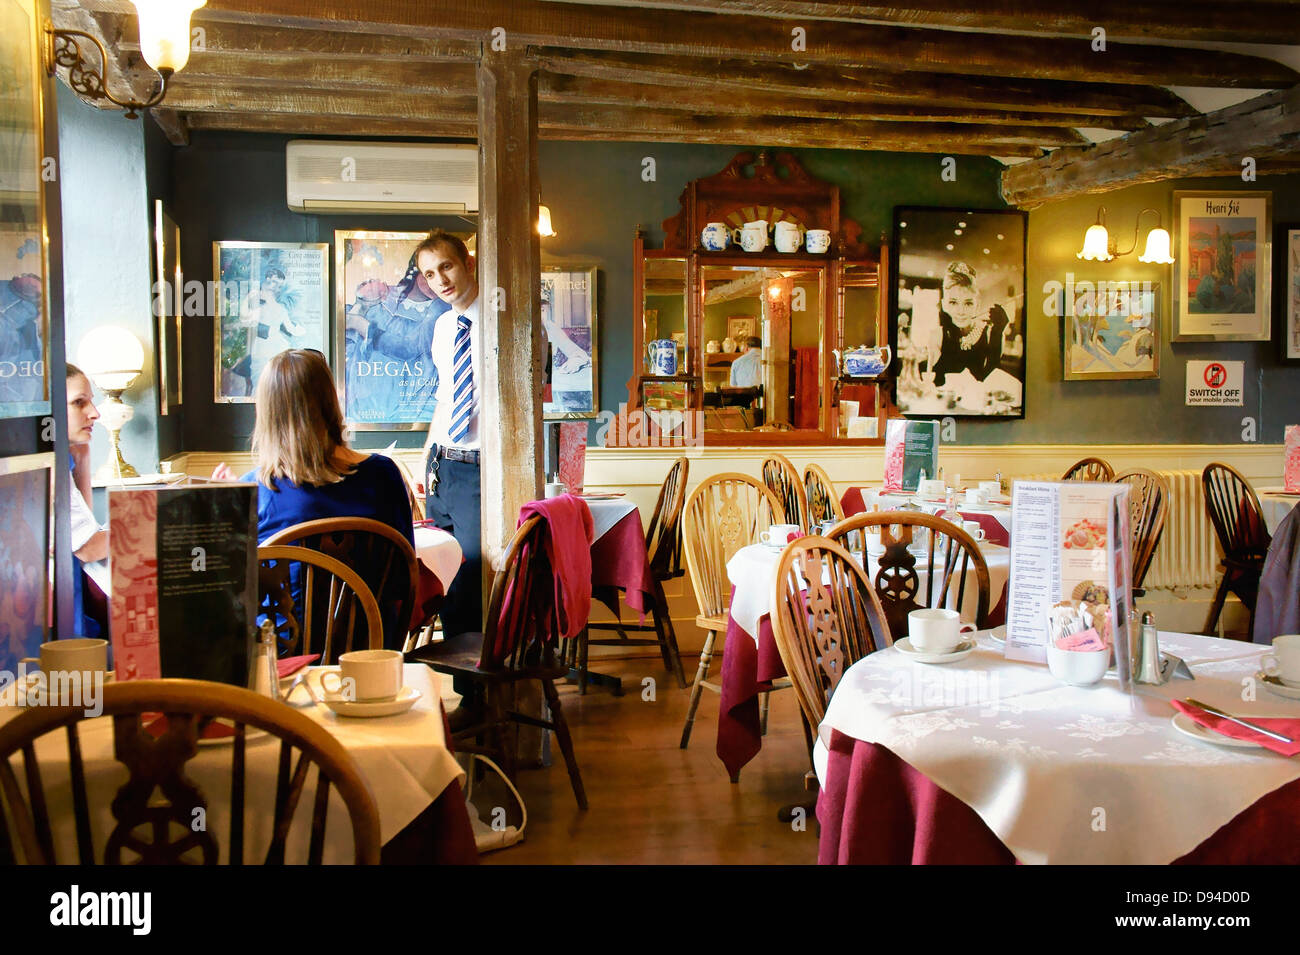 Interior of the traditional Polly Tea Rooms on the High Street of the Wiltshire town of Marlborough, England Stock Photo